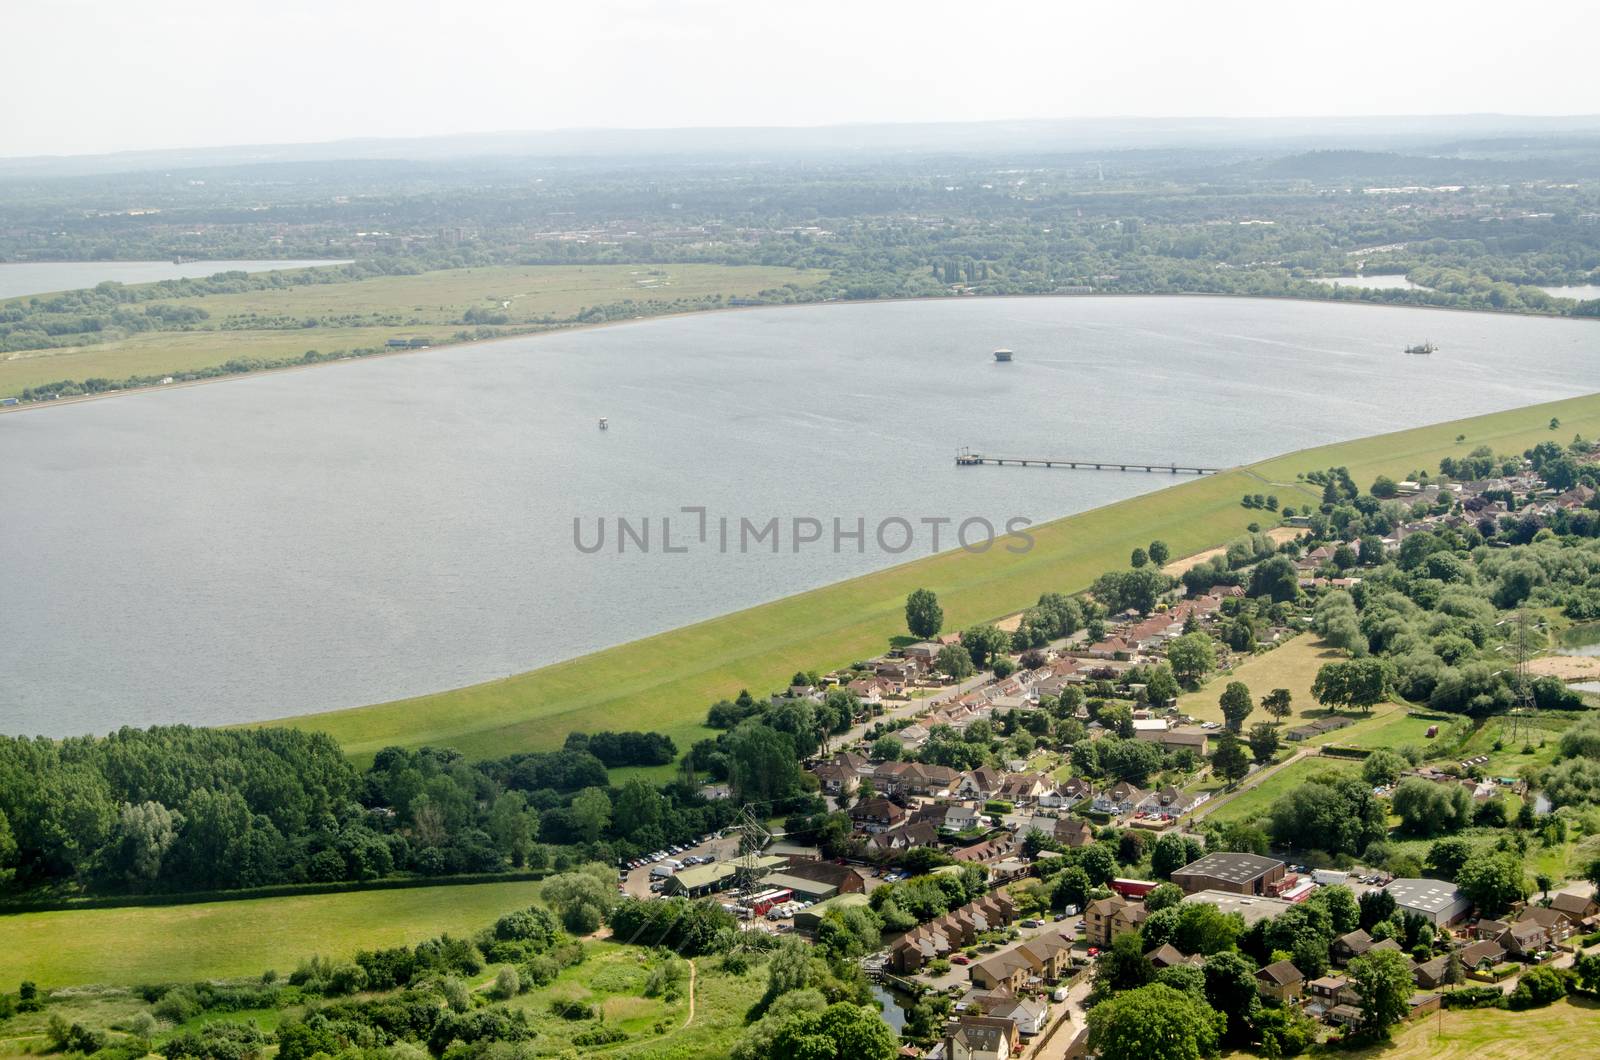 Aerial view on the approach to London's Heathrow Airport of the Wraysbury Reservoir in Slough, Berkshire which supplies water to West London.  Beyond the water is part of the M25 Motorway. 